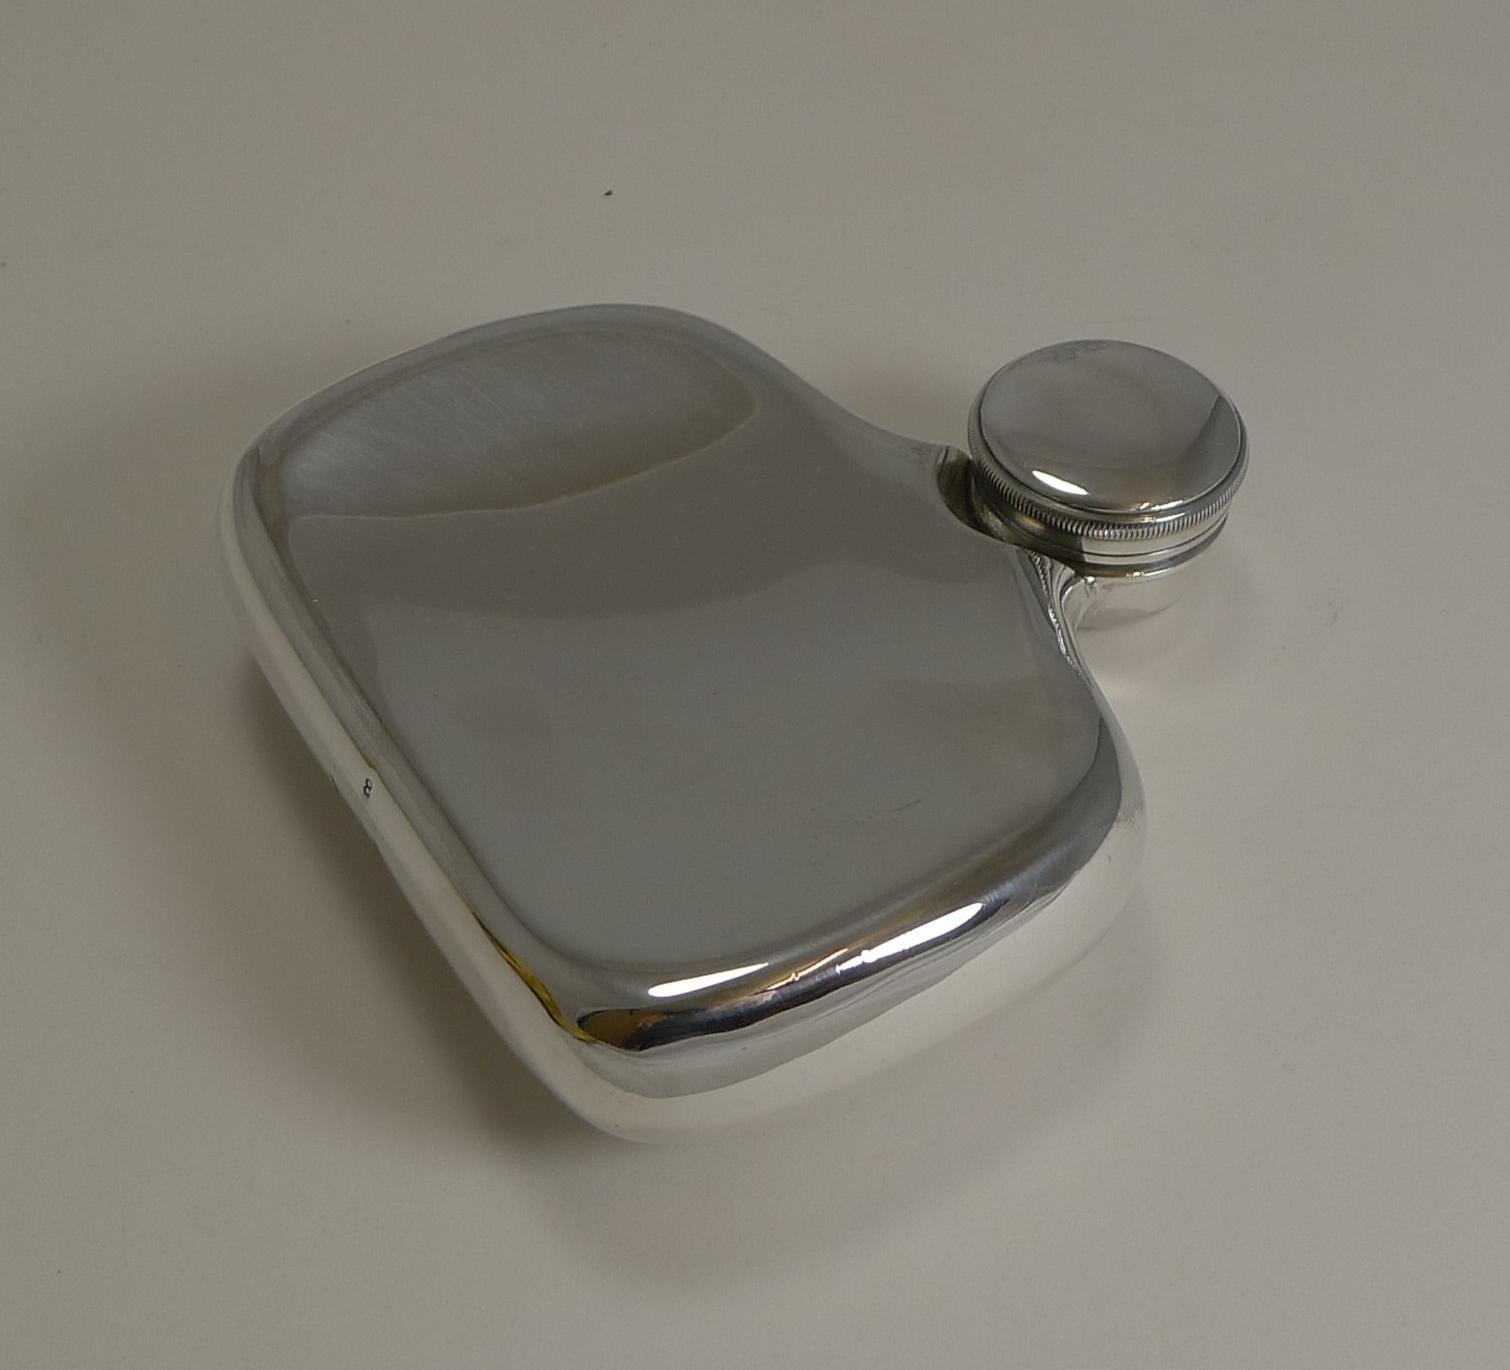 A rare English hip flask dating to the late Victorian era, around 1885.

This unusual, electro- plated hip flask was made by James Dixon & Son to the patent design of Joseph Hall. Both Hall and Dixon were from Sheffield and the latter’s business